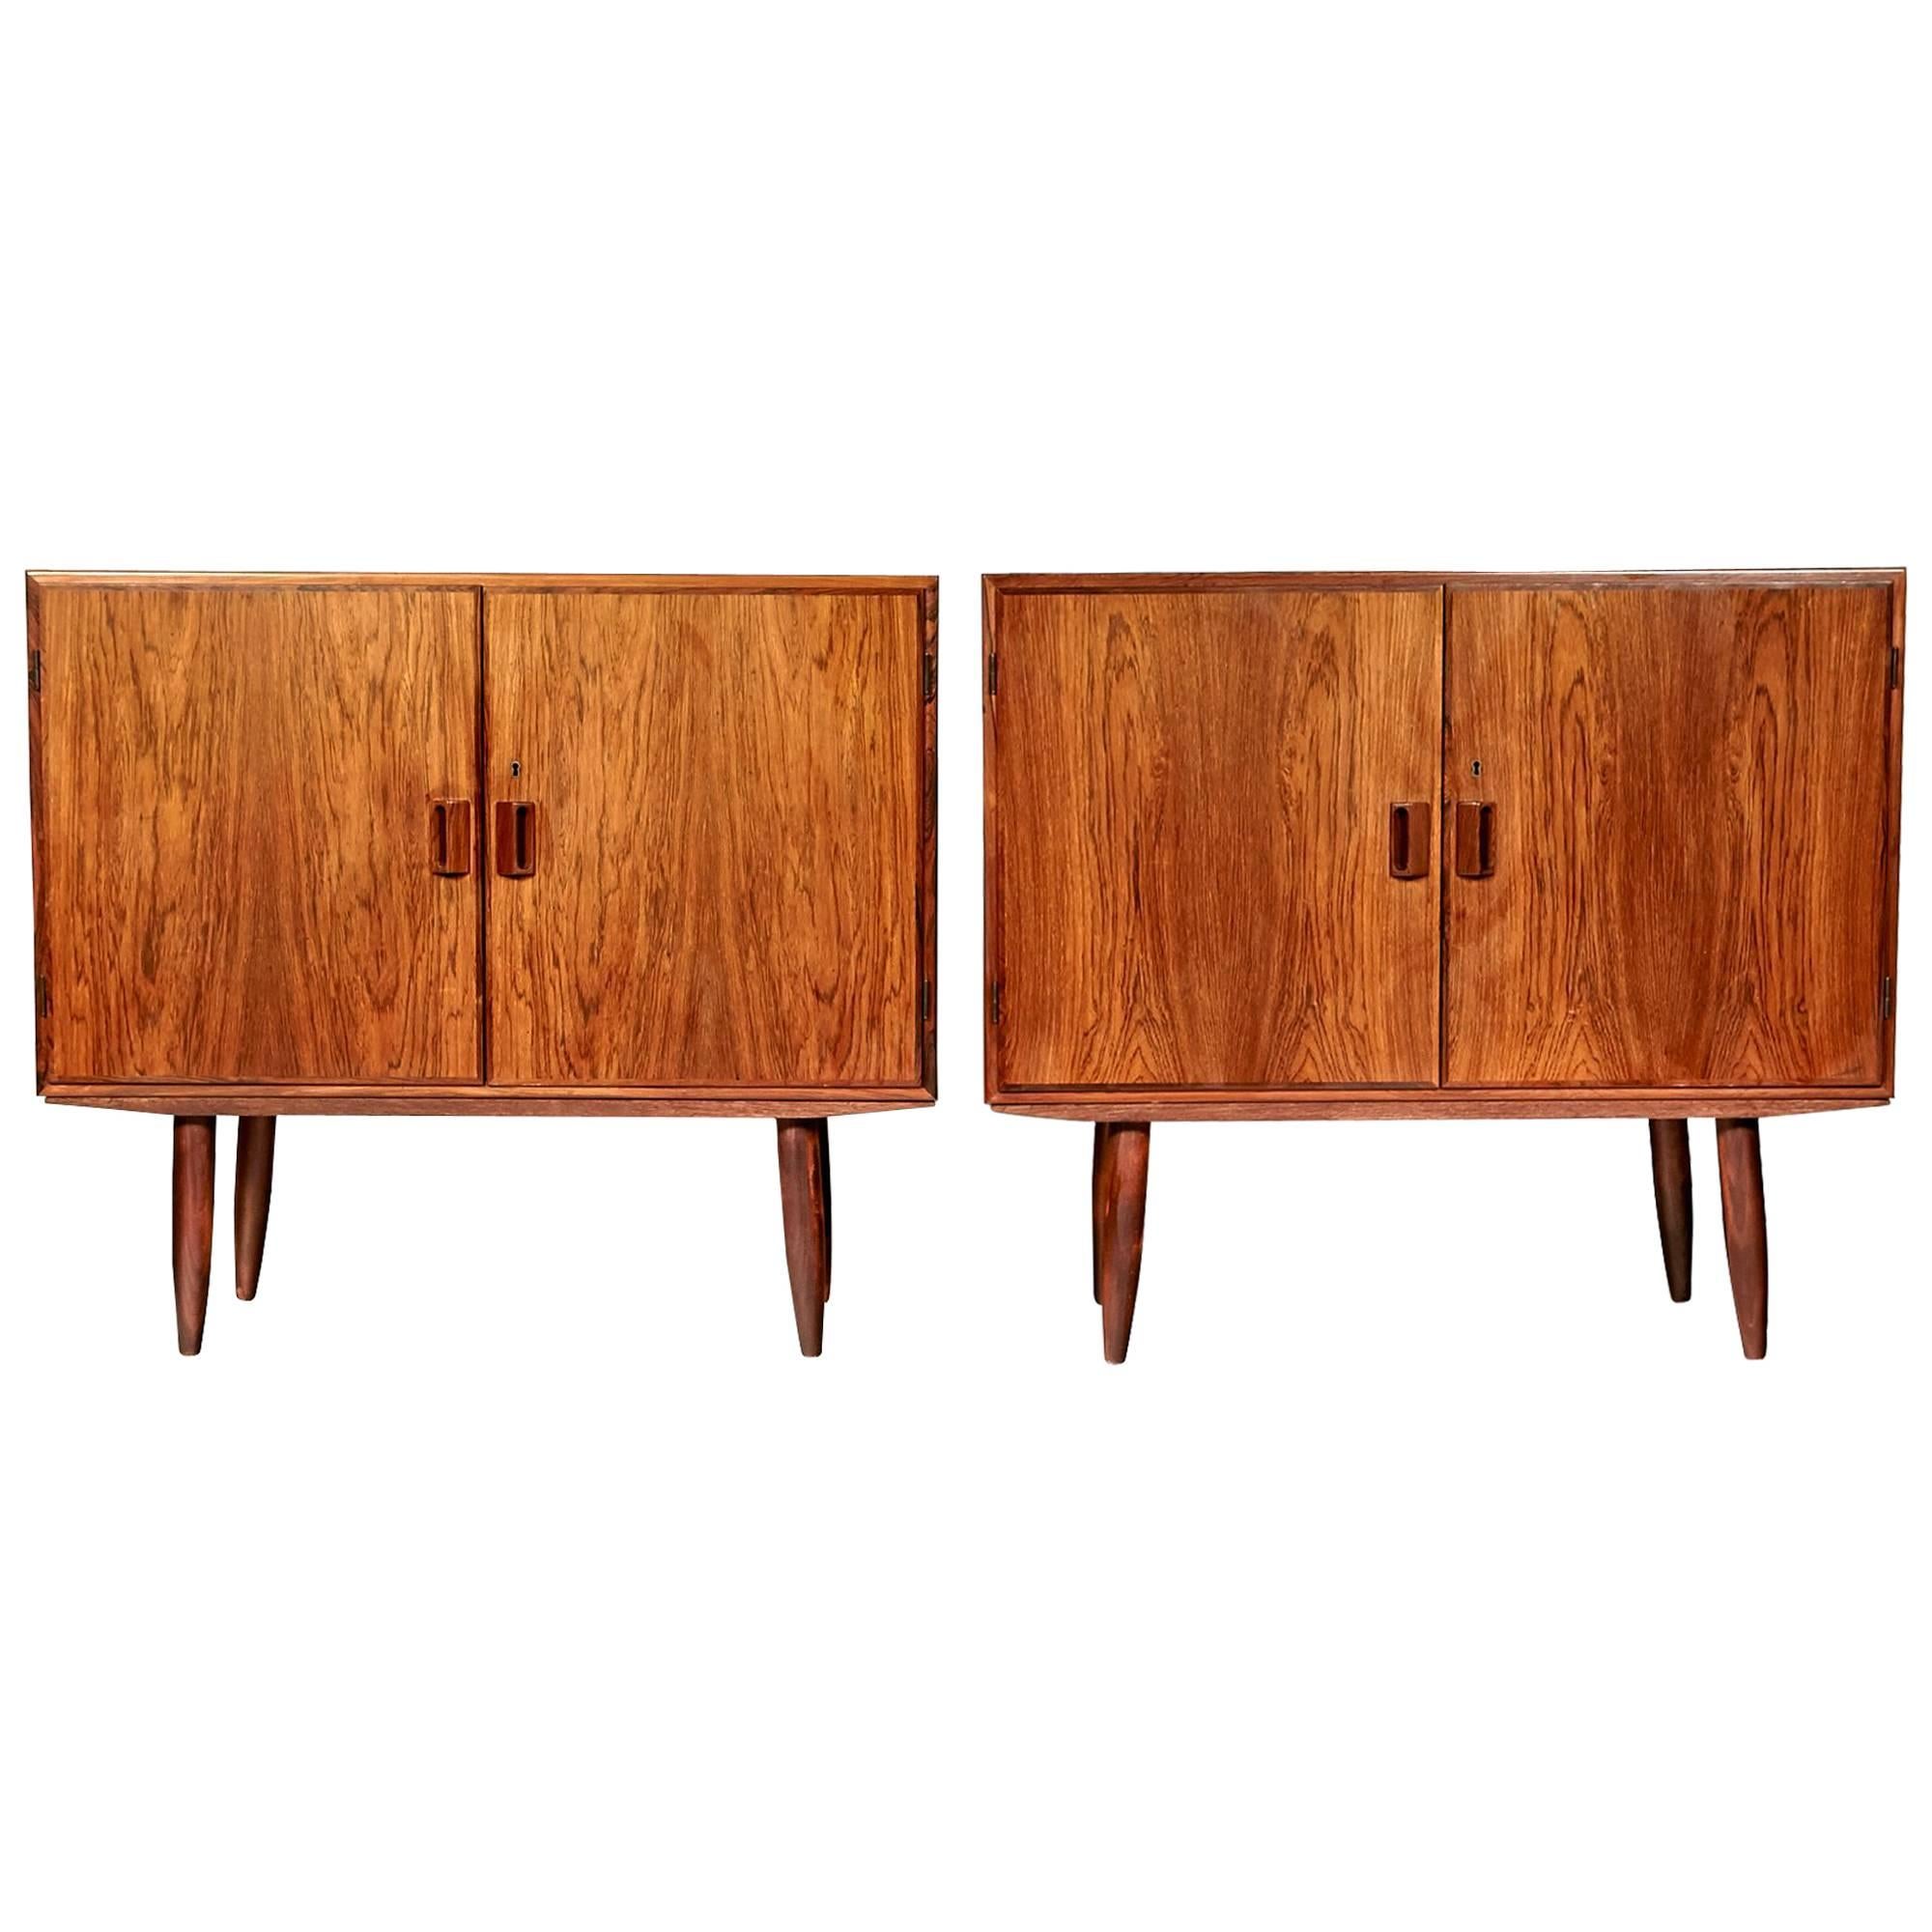 Danish Borge Mogensen Rosewood Pair of Cabinets, 1960s For Sale